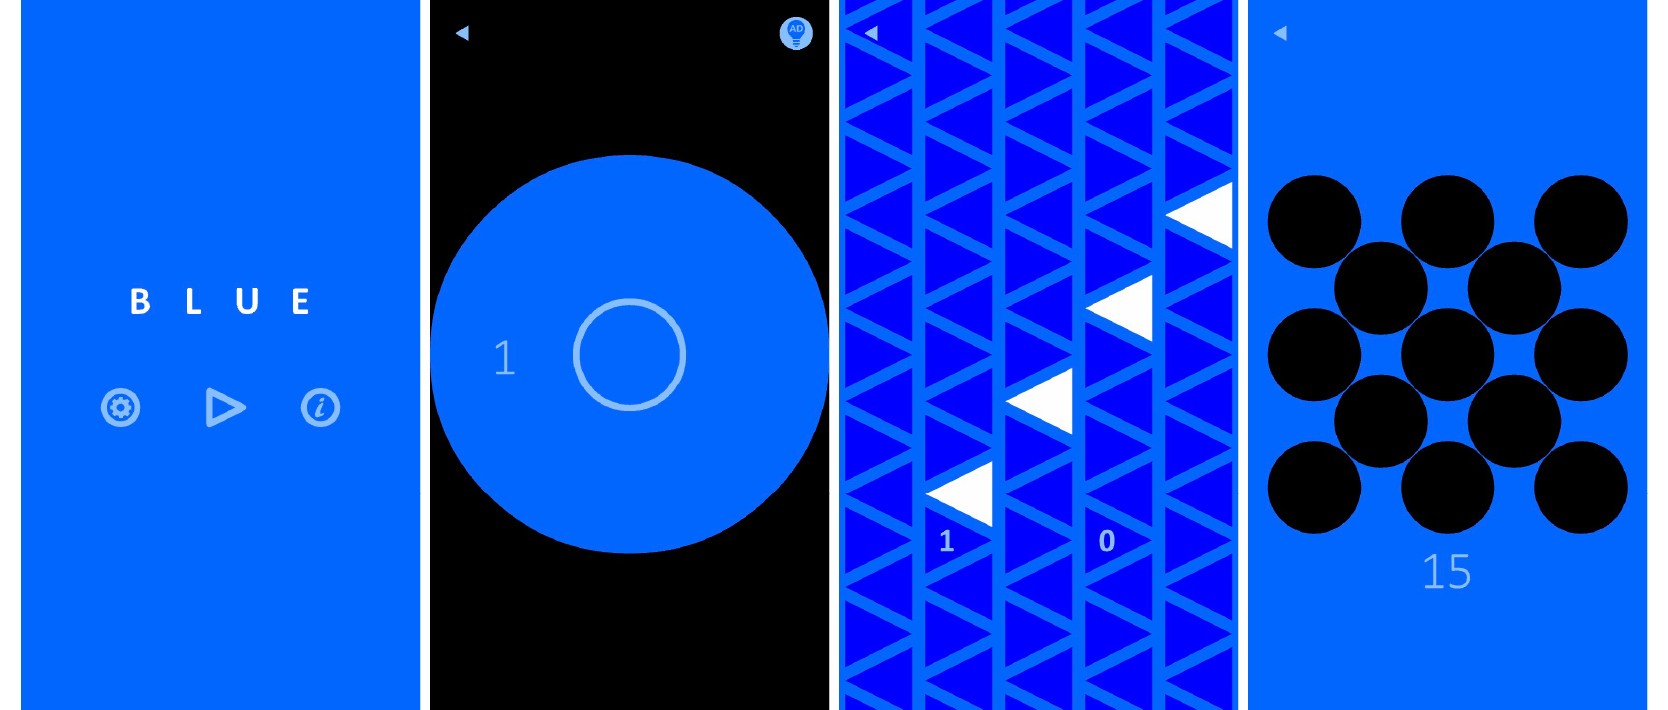 Screenshots of Blue android game